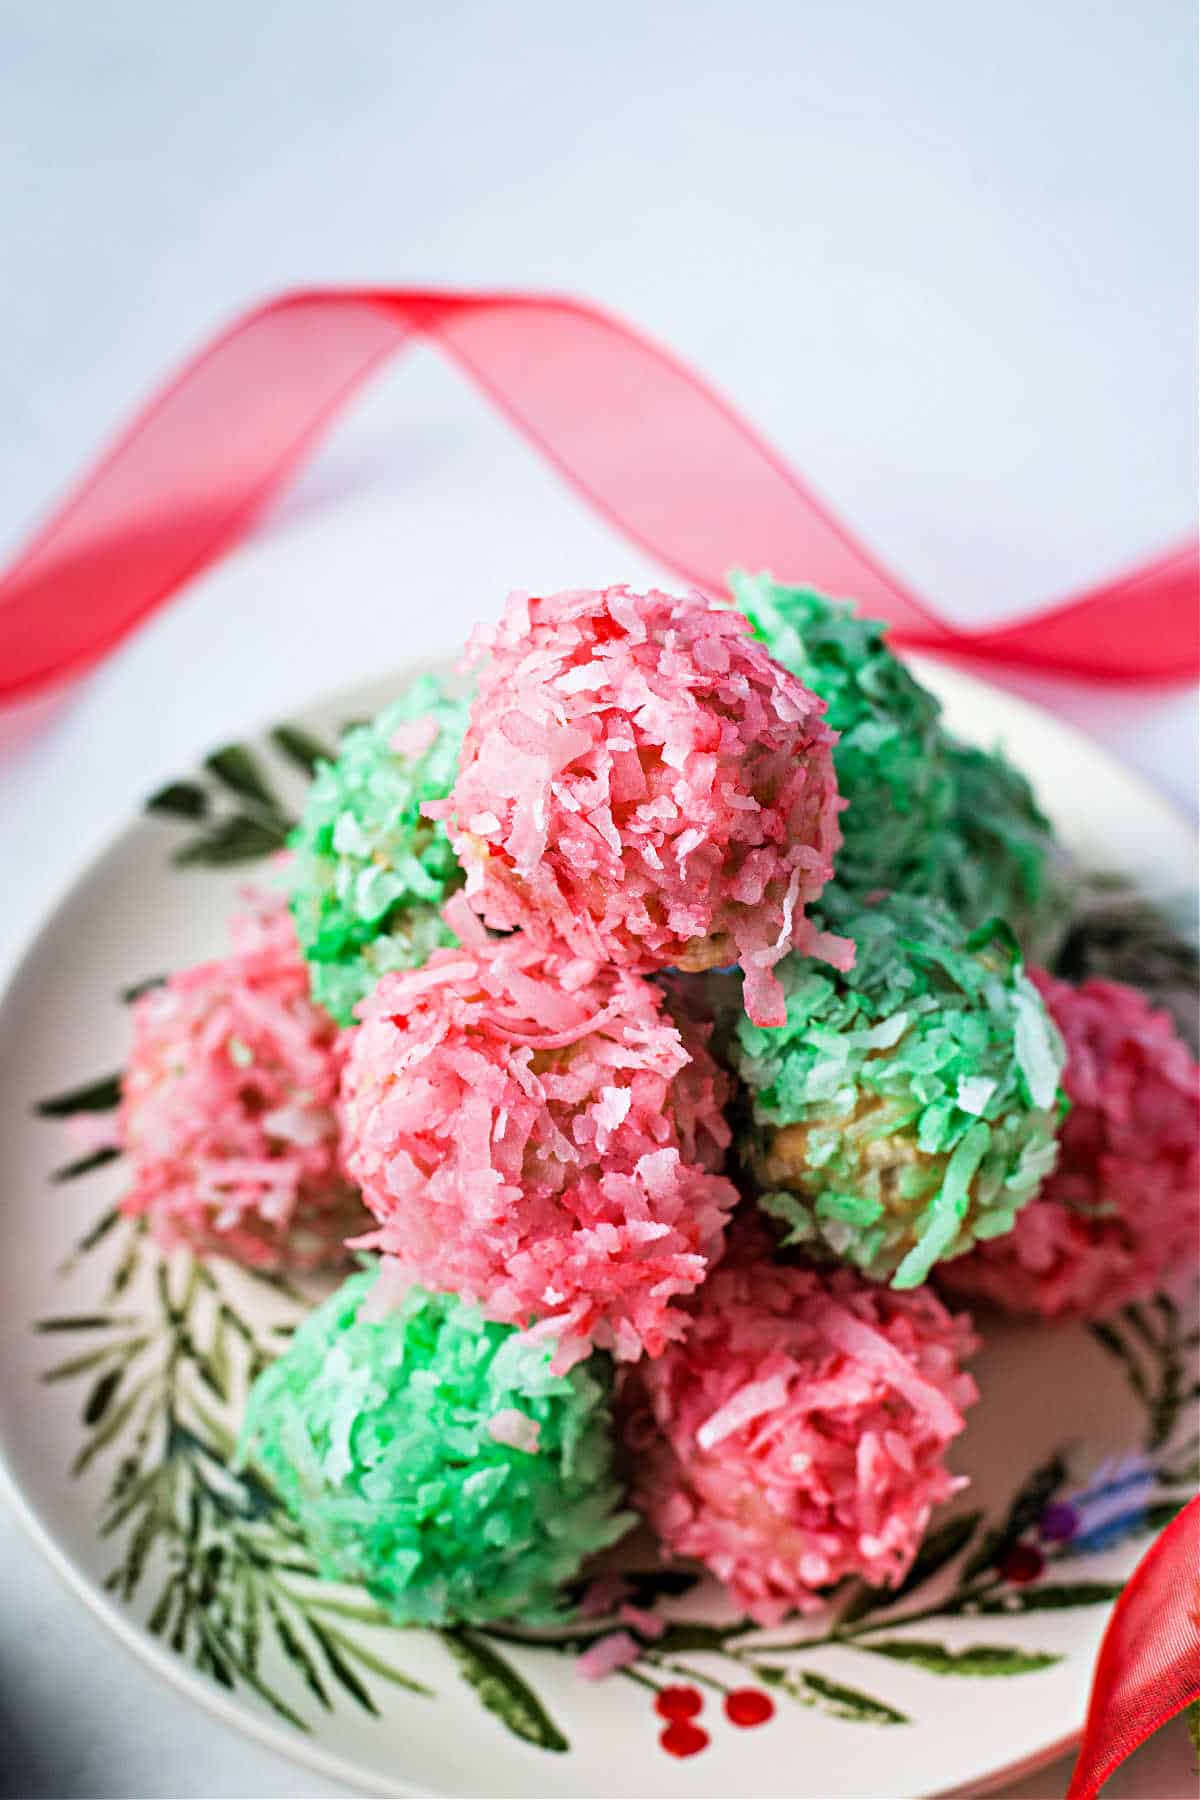 Homemade Coconut Balls in bright green and red colors on a plate with a Christmas design.